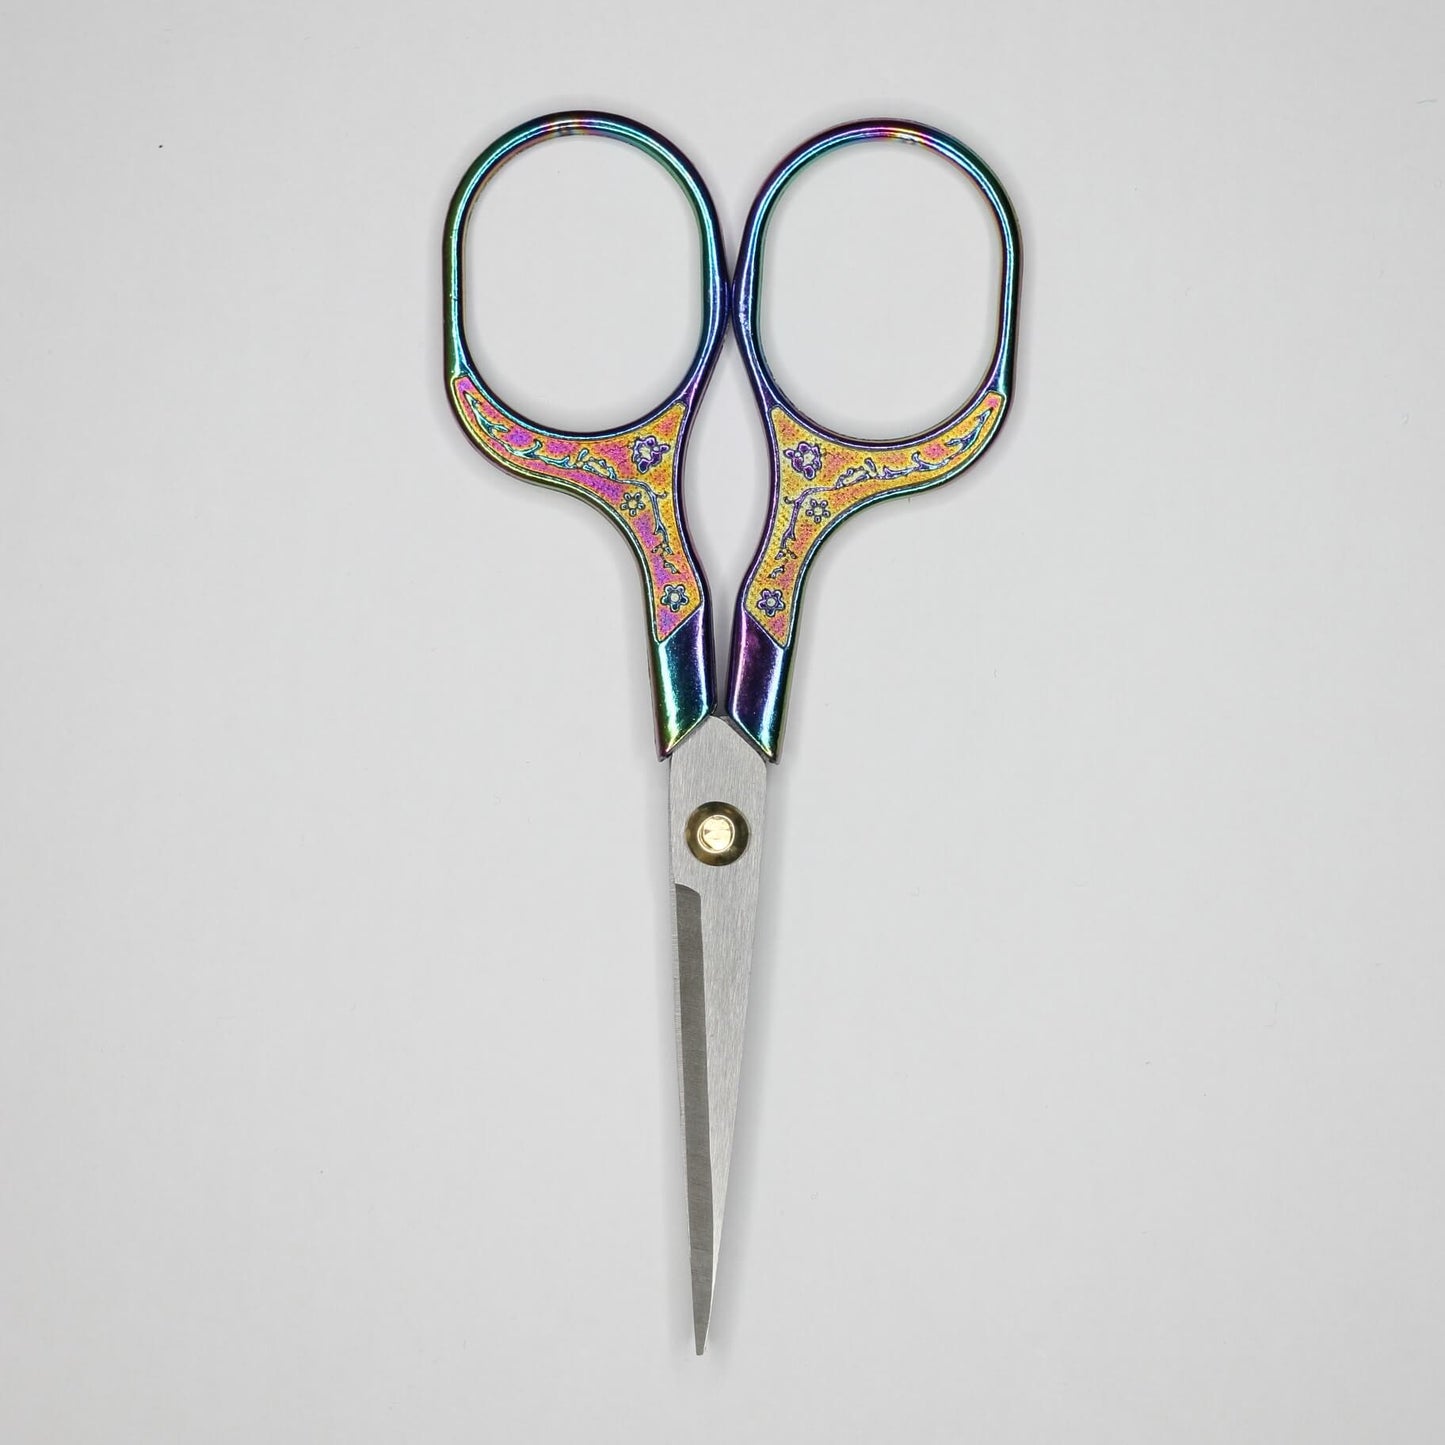 Plum Blossom Stainless Steel Embroidery Scissors